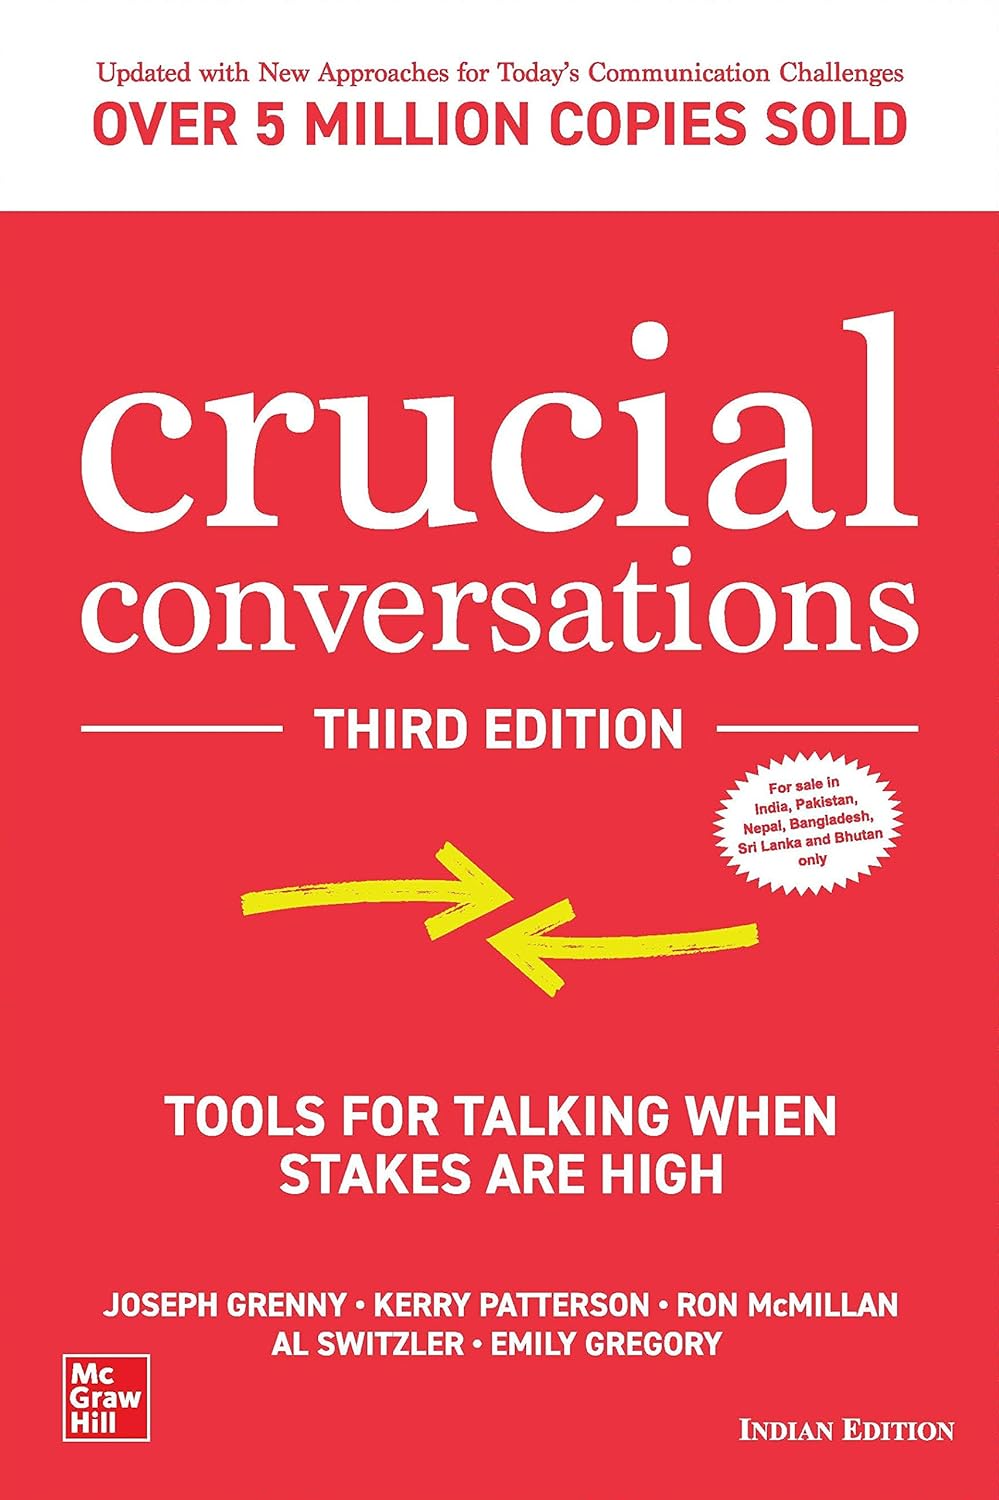 Crucial Conversations: Tools for Talking When Stakes Are High by Joseph Grenny, Kerry Patterson, Ron McMillan, Al Switzler, Emily Gregory